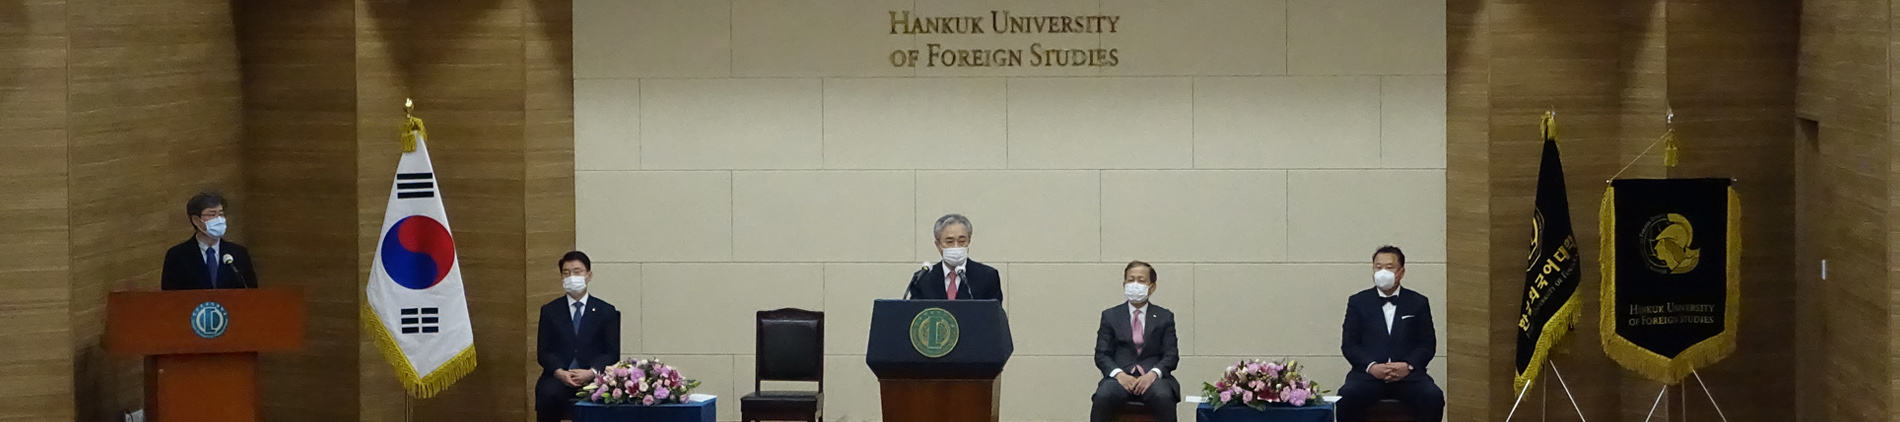 HUFS marks the 67th anniversary of Seoul Campus 
<br>and the 41st anniversary of Global Campus